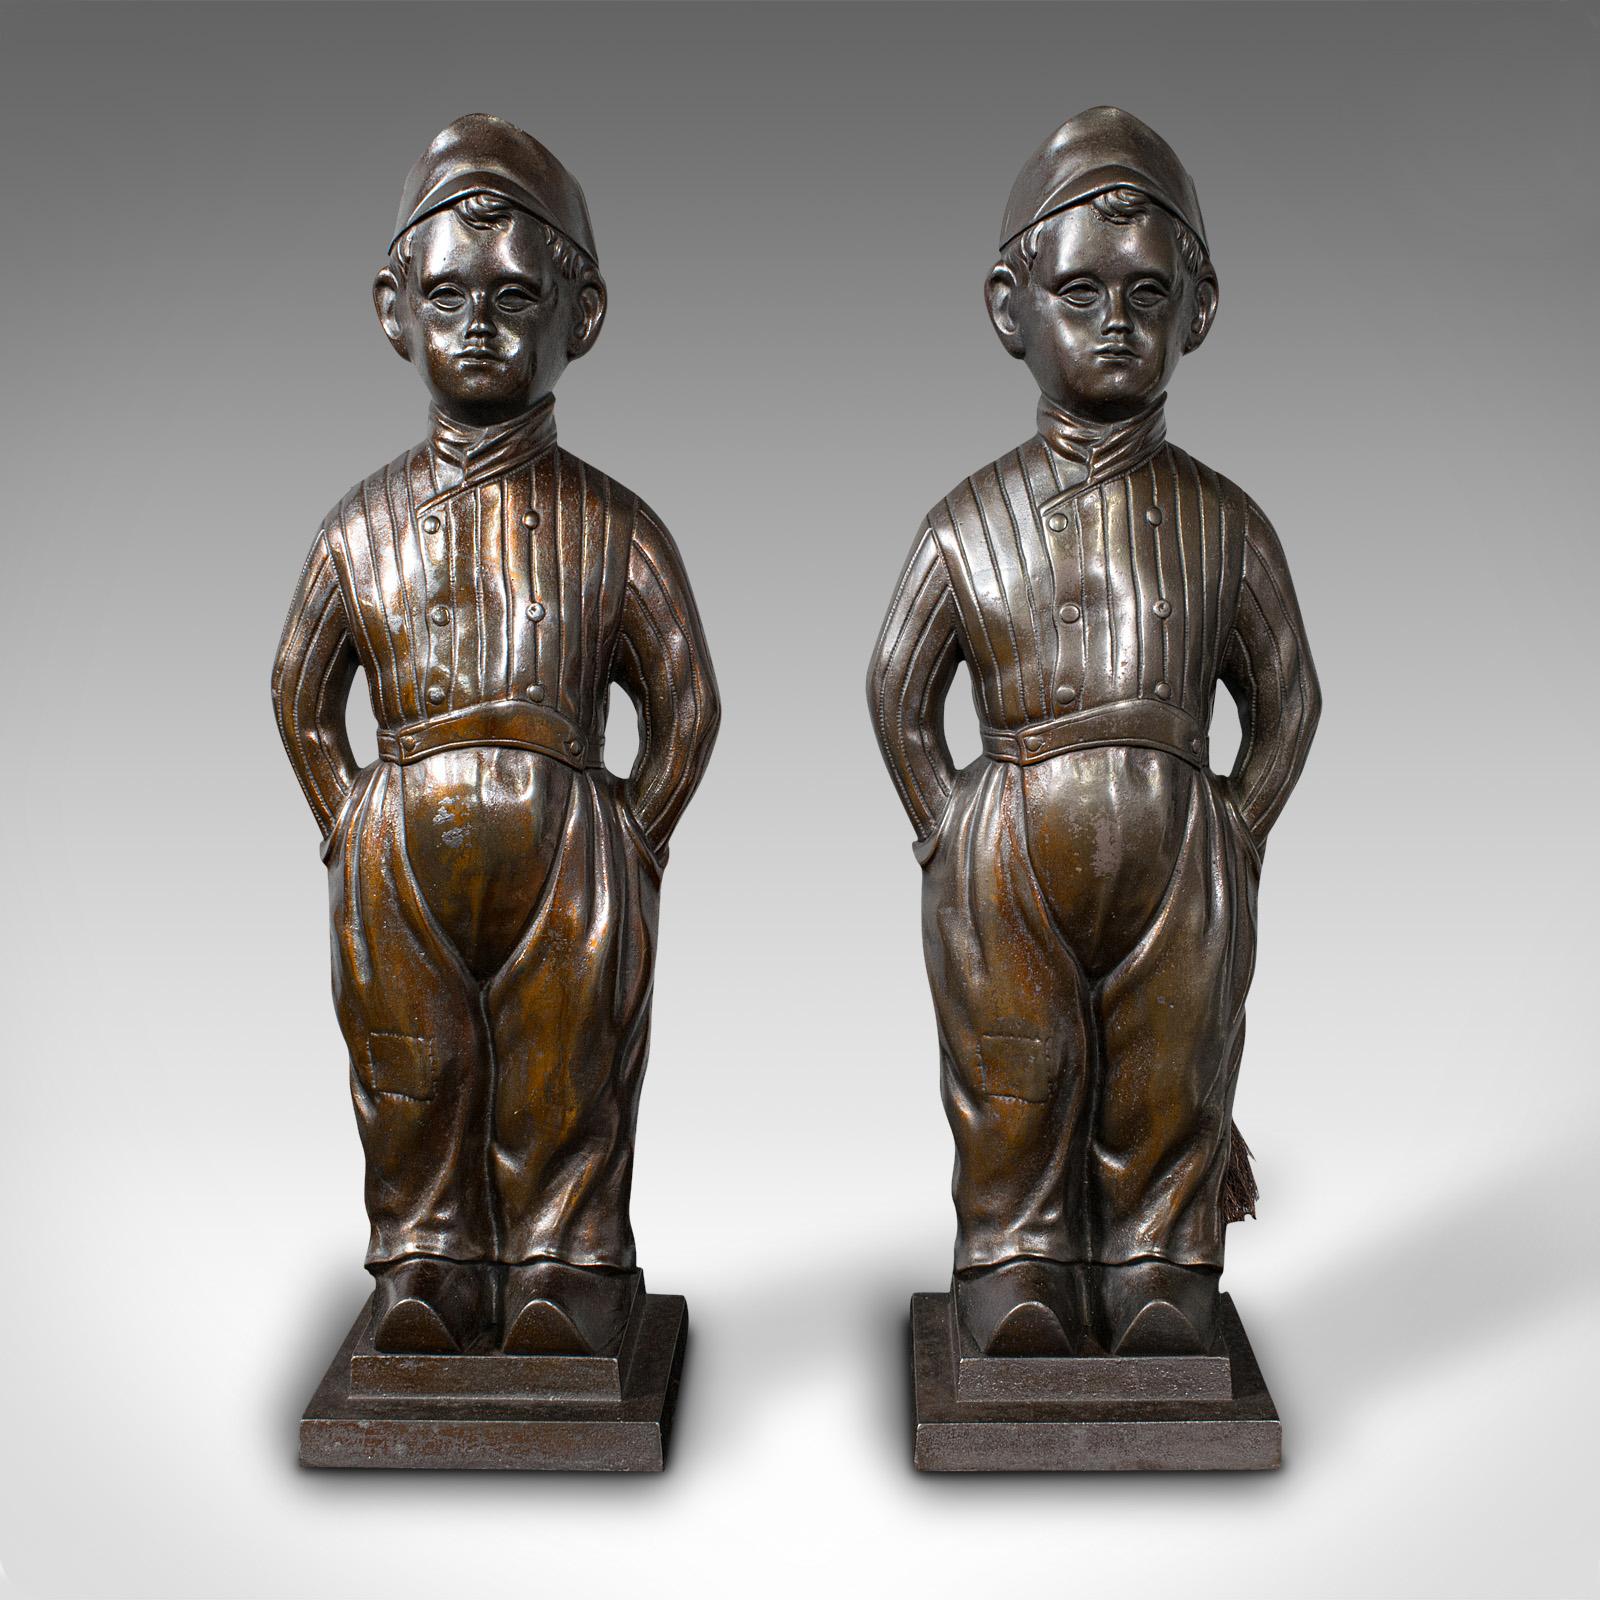 This is a pair of antique fireside boys. An English, cast iron fireplace companion with tools, dating to the early 20th century, circa 1920.

Delightfully charming tool rests, with copious appeal for the fireside
Displaying a desirable aged